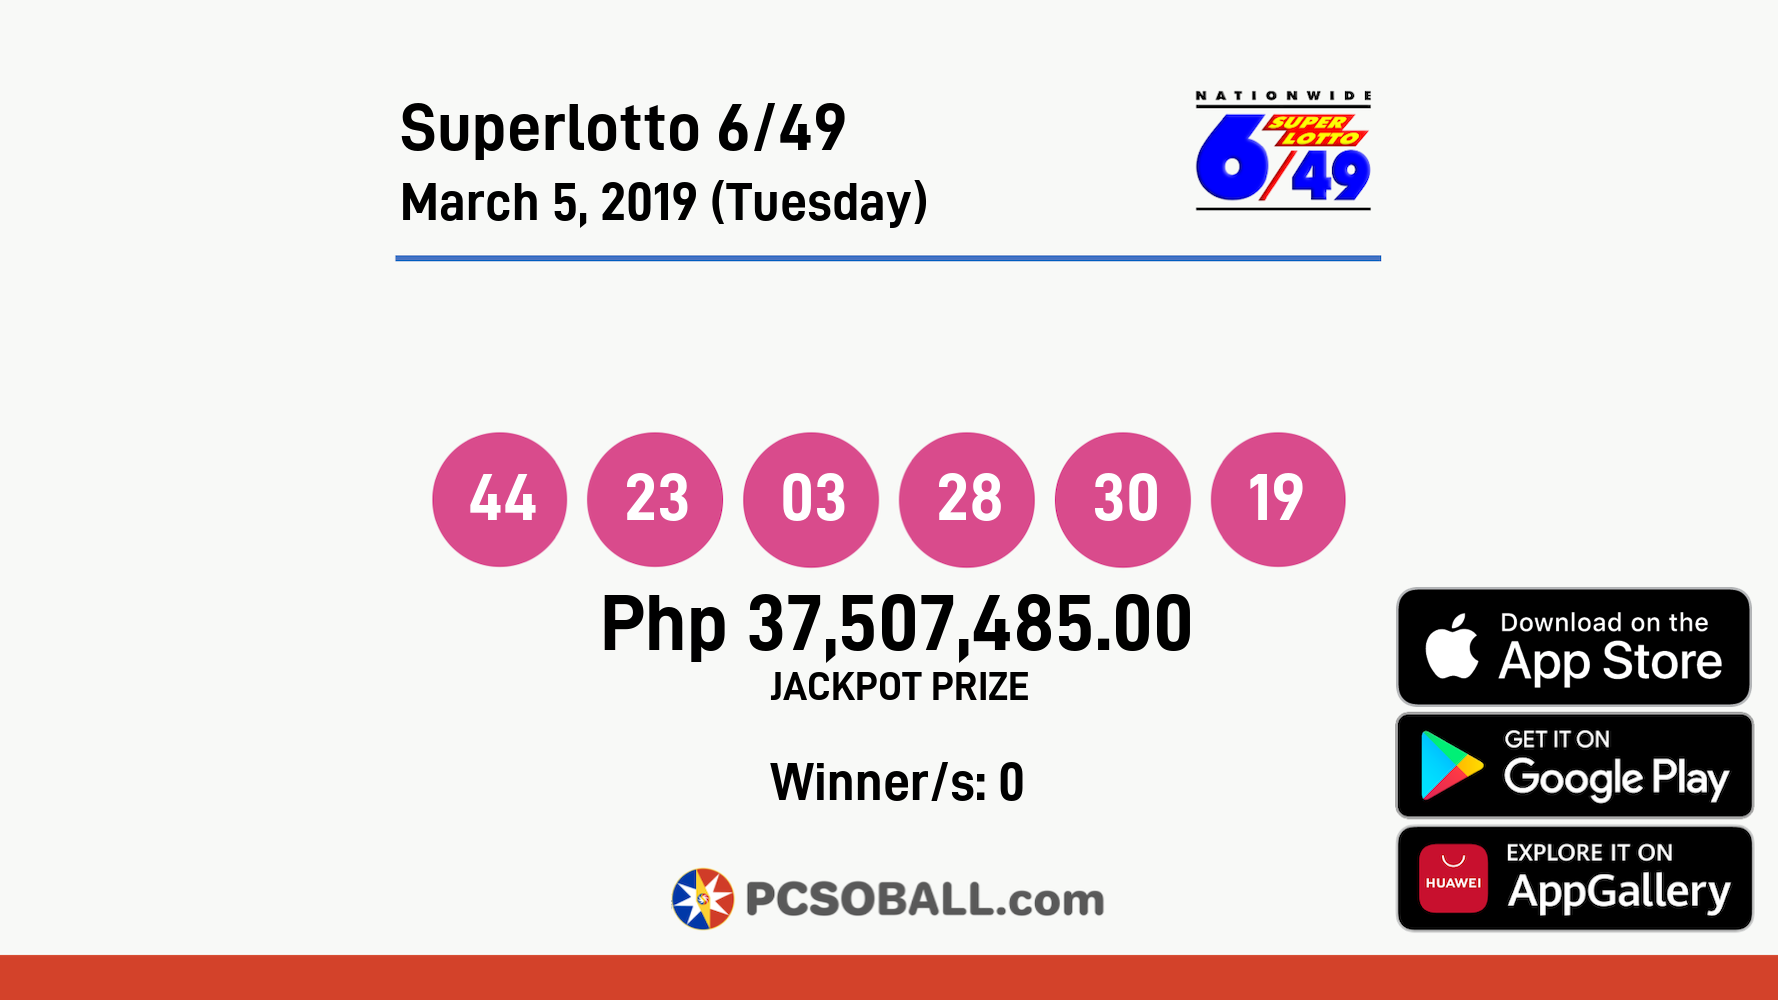 Superlotto 6/49 March 5, 2019 (Tuesday) Result